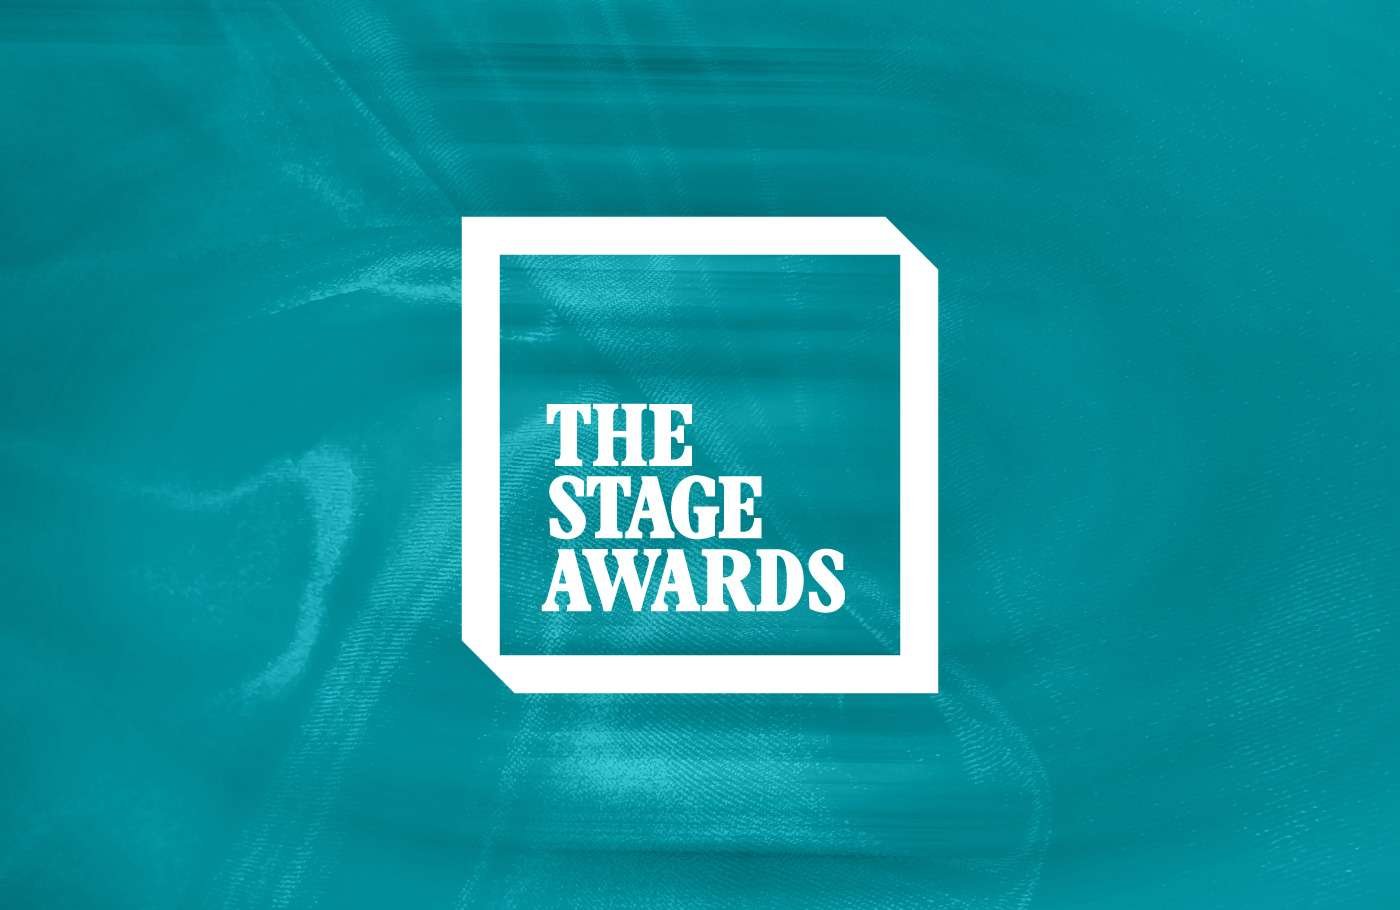 YOUR NEWS – THE STAGE AWARDS